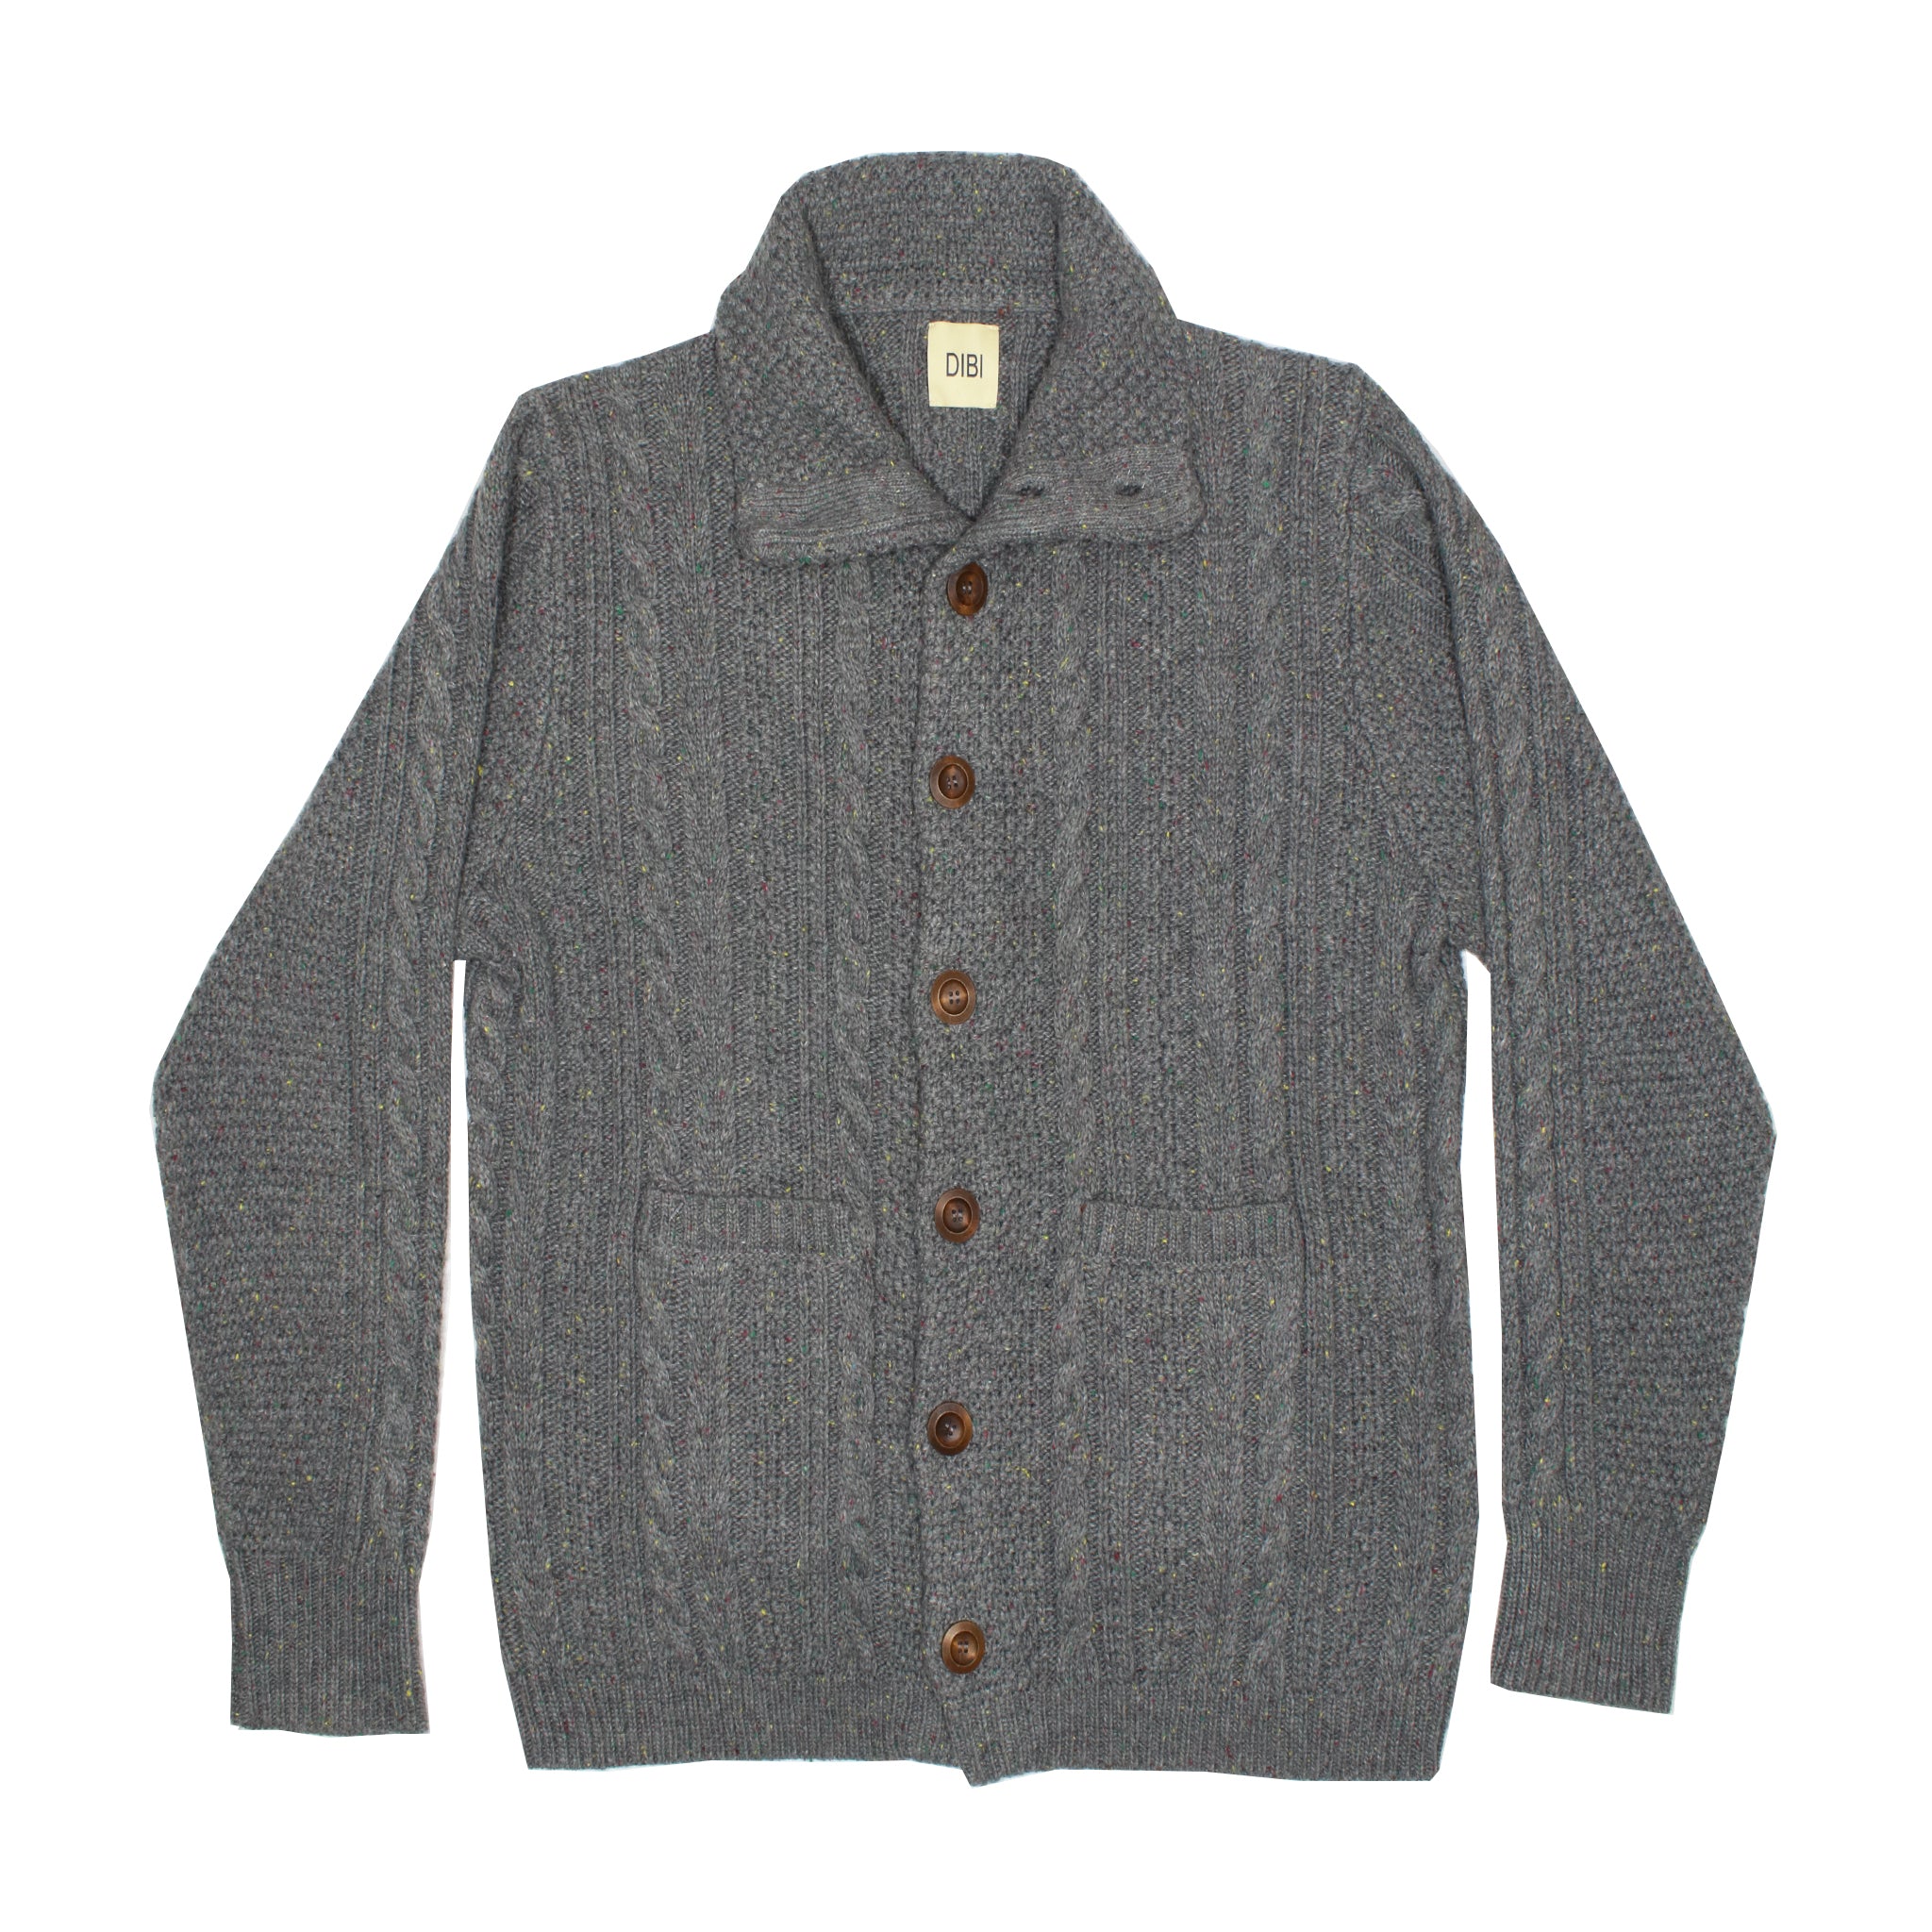 Grey Donegal Cardigan Sweater